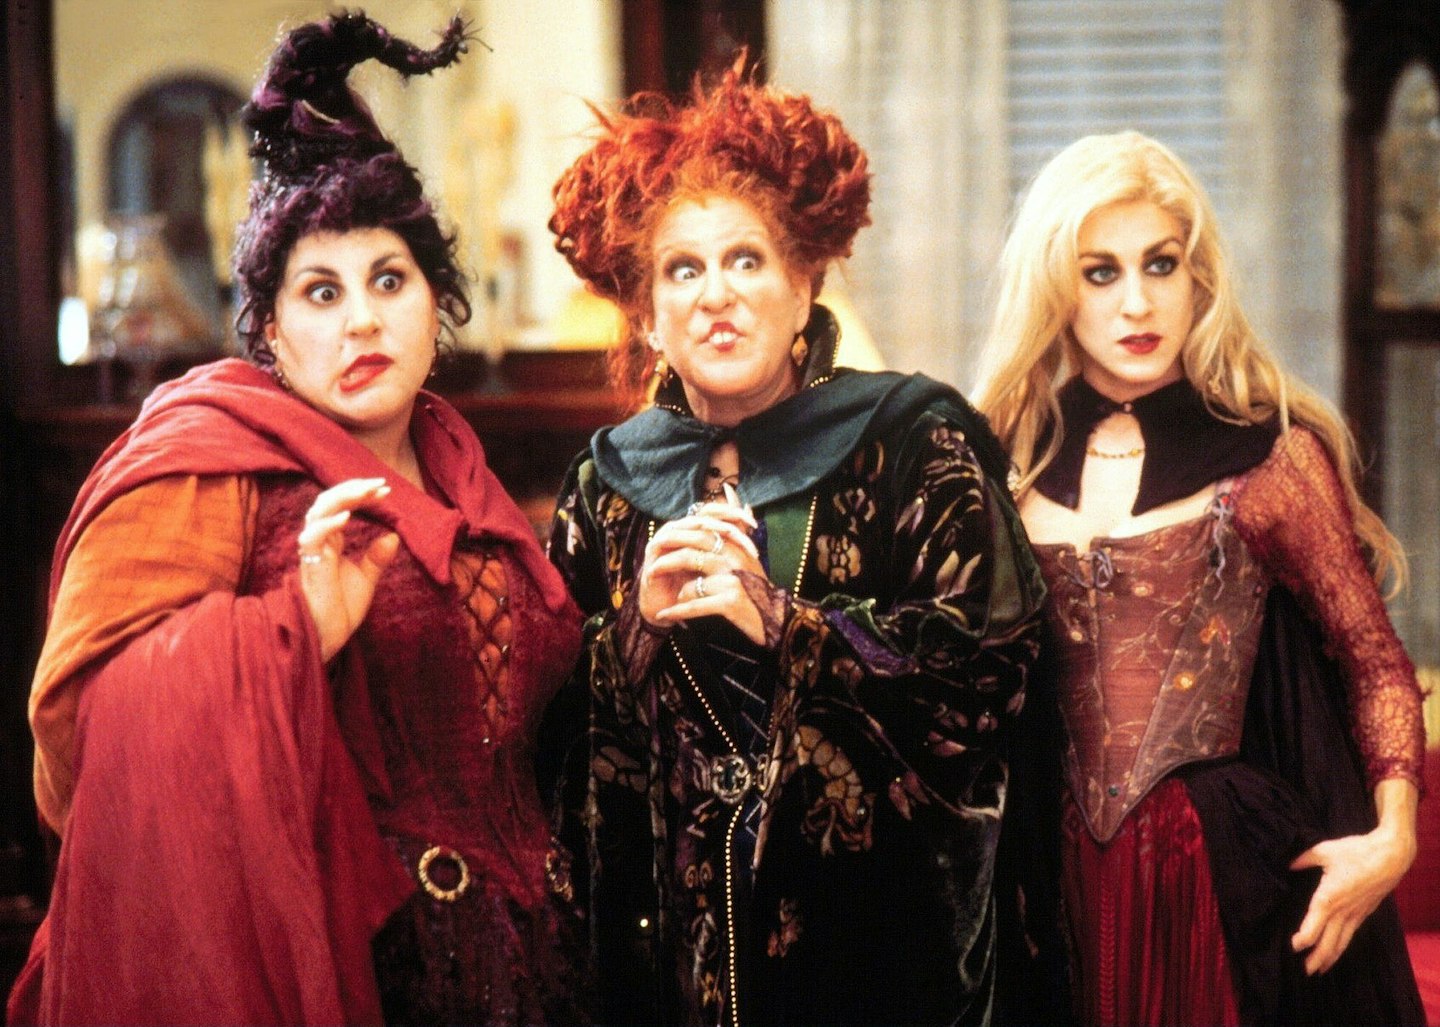 The Sanderson Sisters from The Witches of Eastwick film